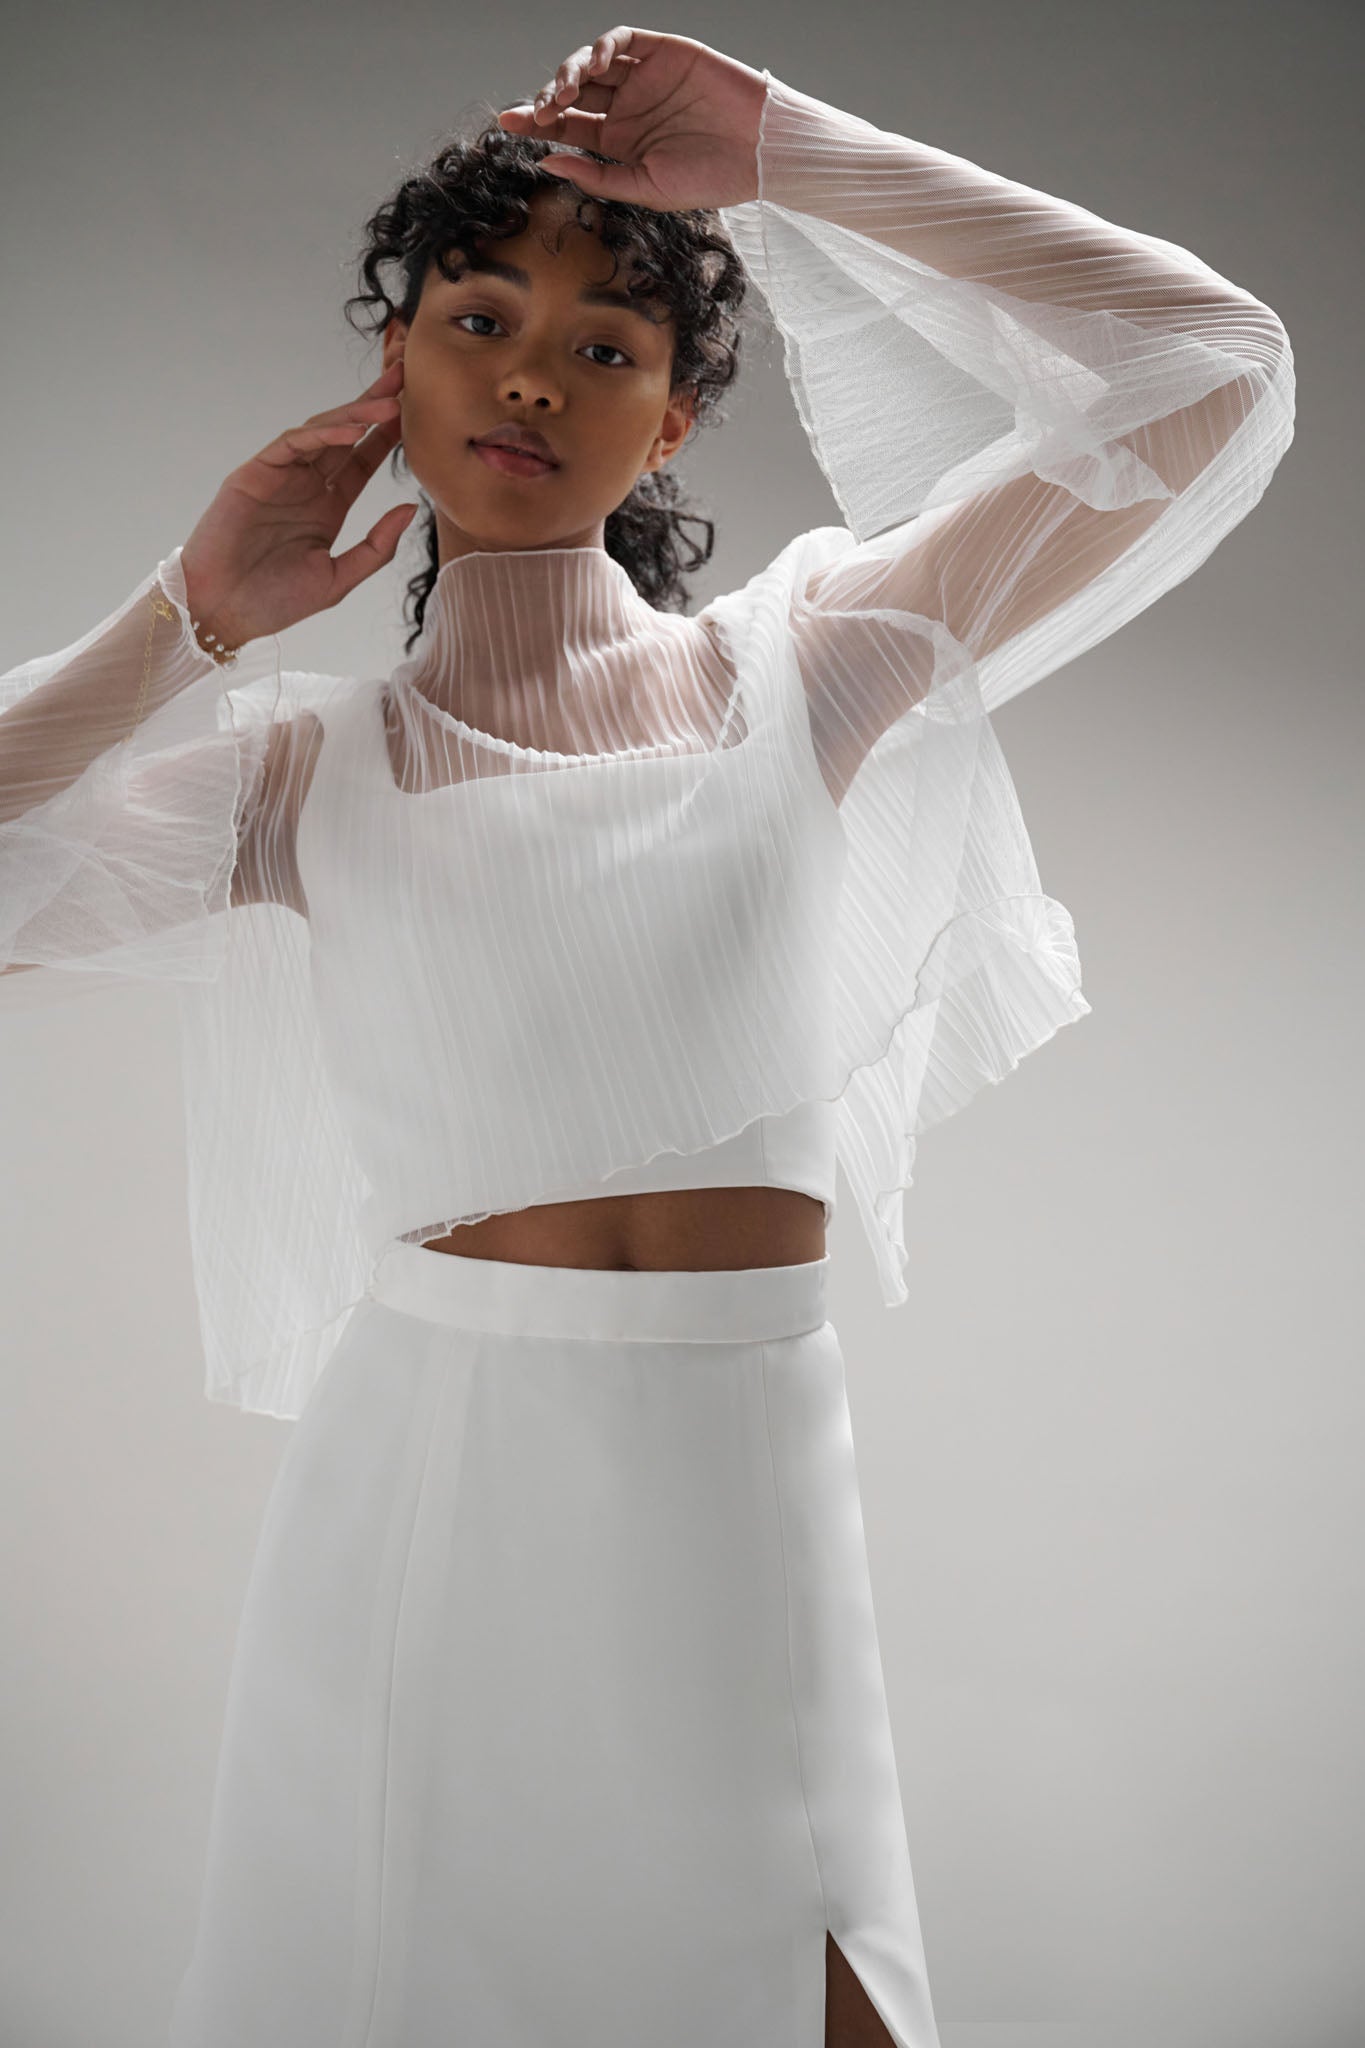 A textured fabric with a seashell-inspired design creates a bold and contemporary look in the bridal world. Its unique shape and form make it a versatile choice, perfect for styling with a range of outfits including skirts, pants, tops, or dresses